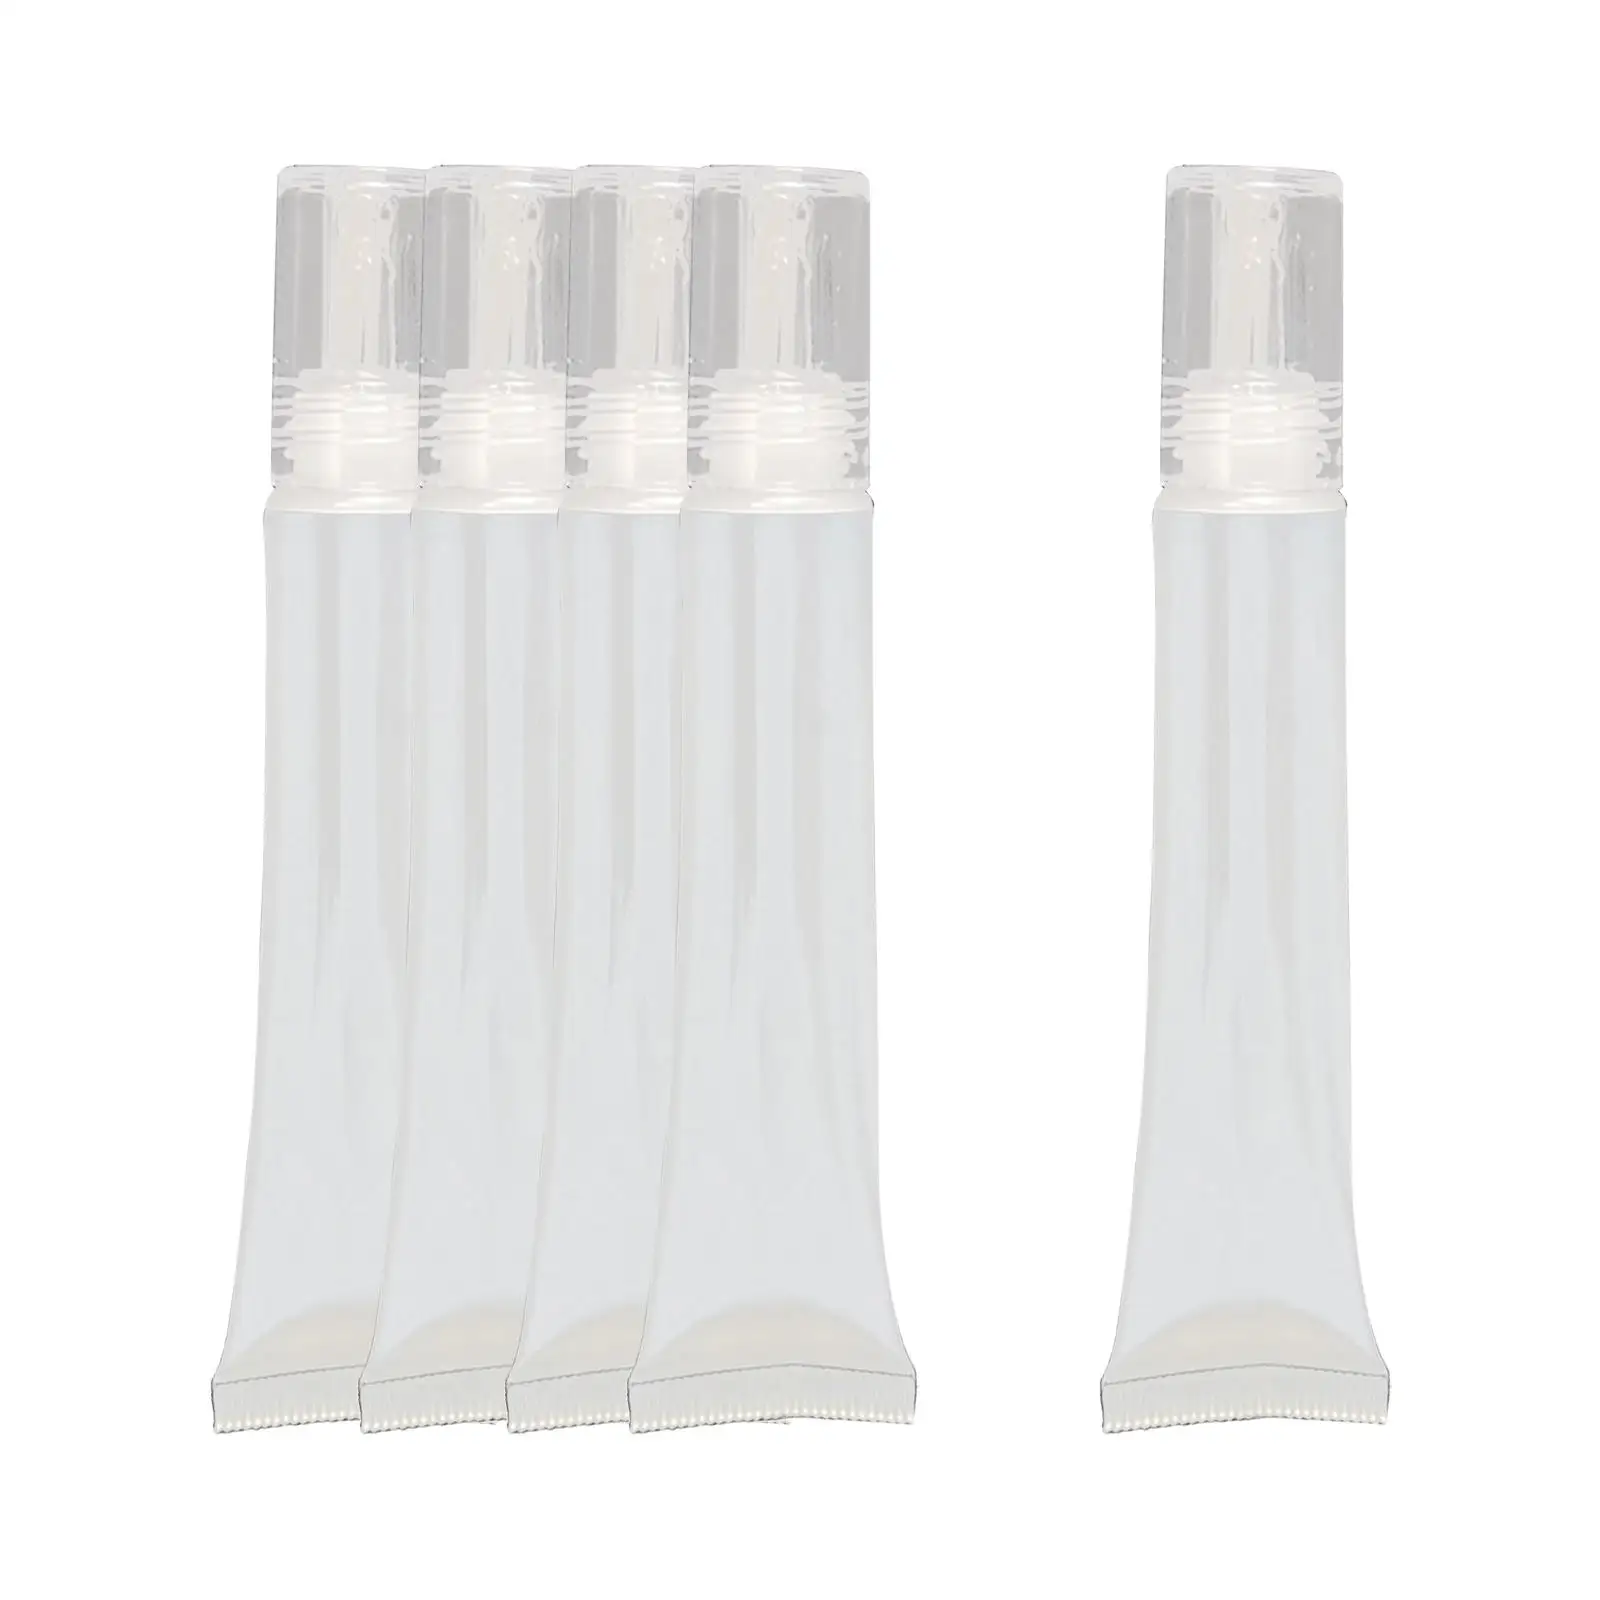 5Pcs Cosmetic Soft Tubes with caps Sample 20ml/0.7oz Holder for Facial Cleaning Toothpaste